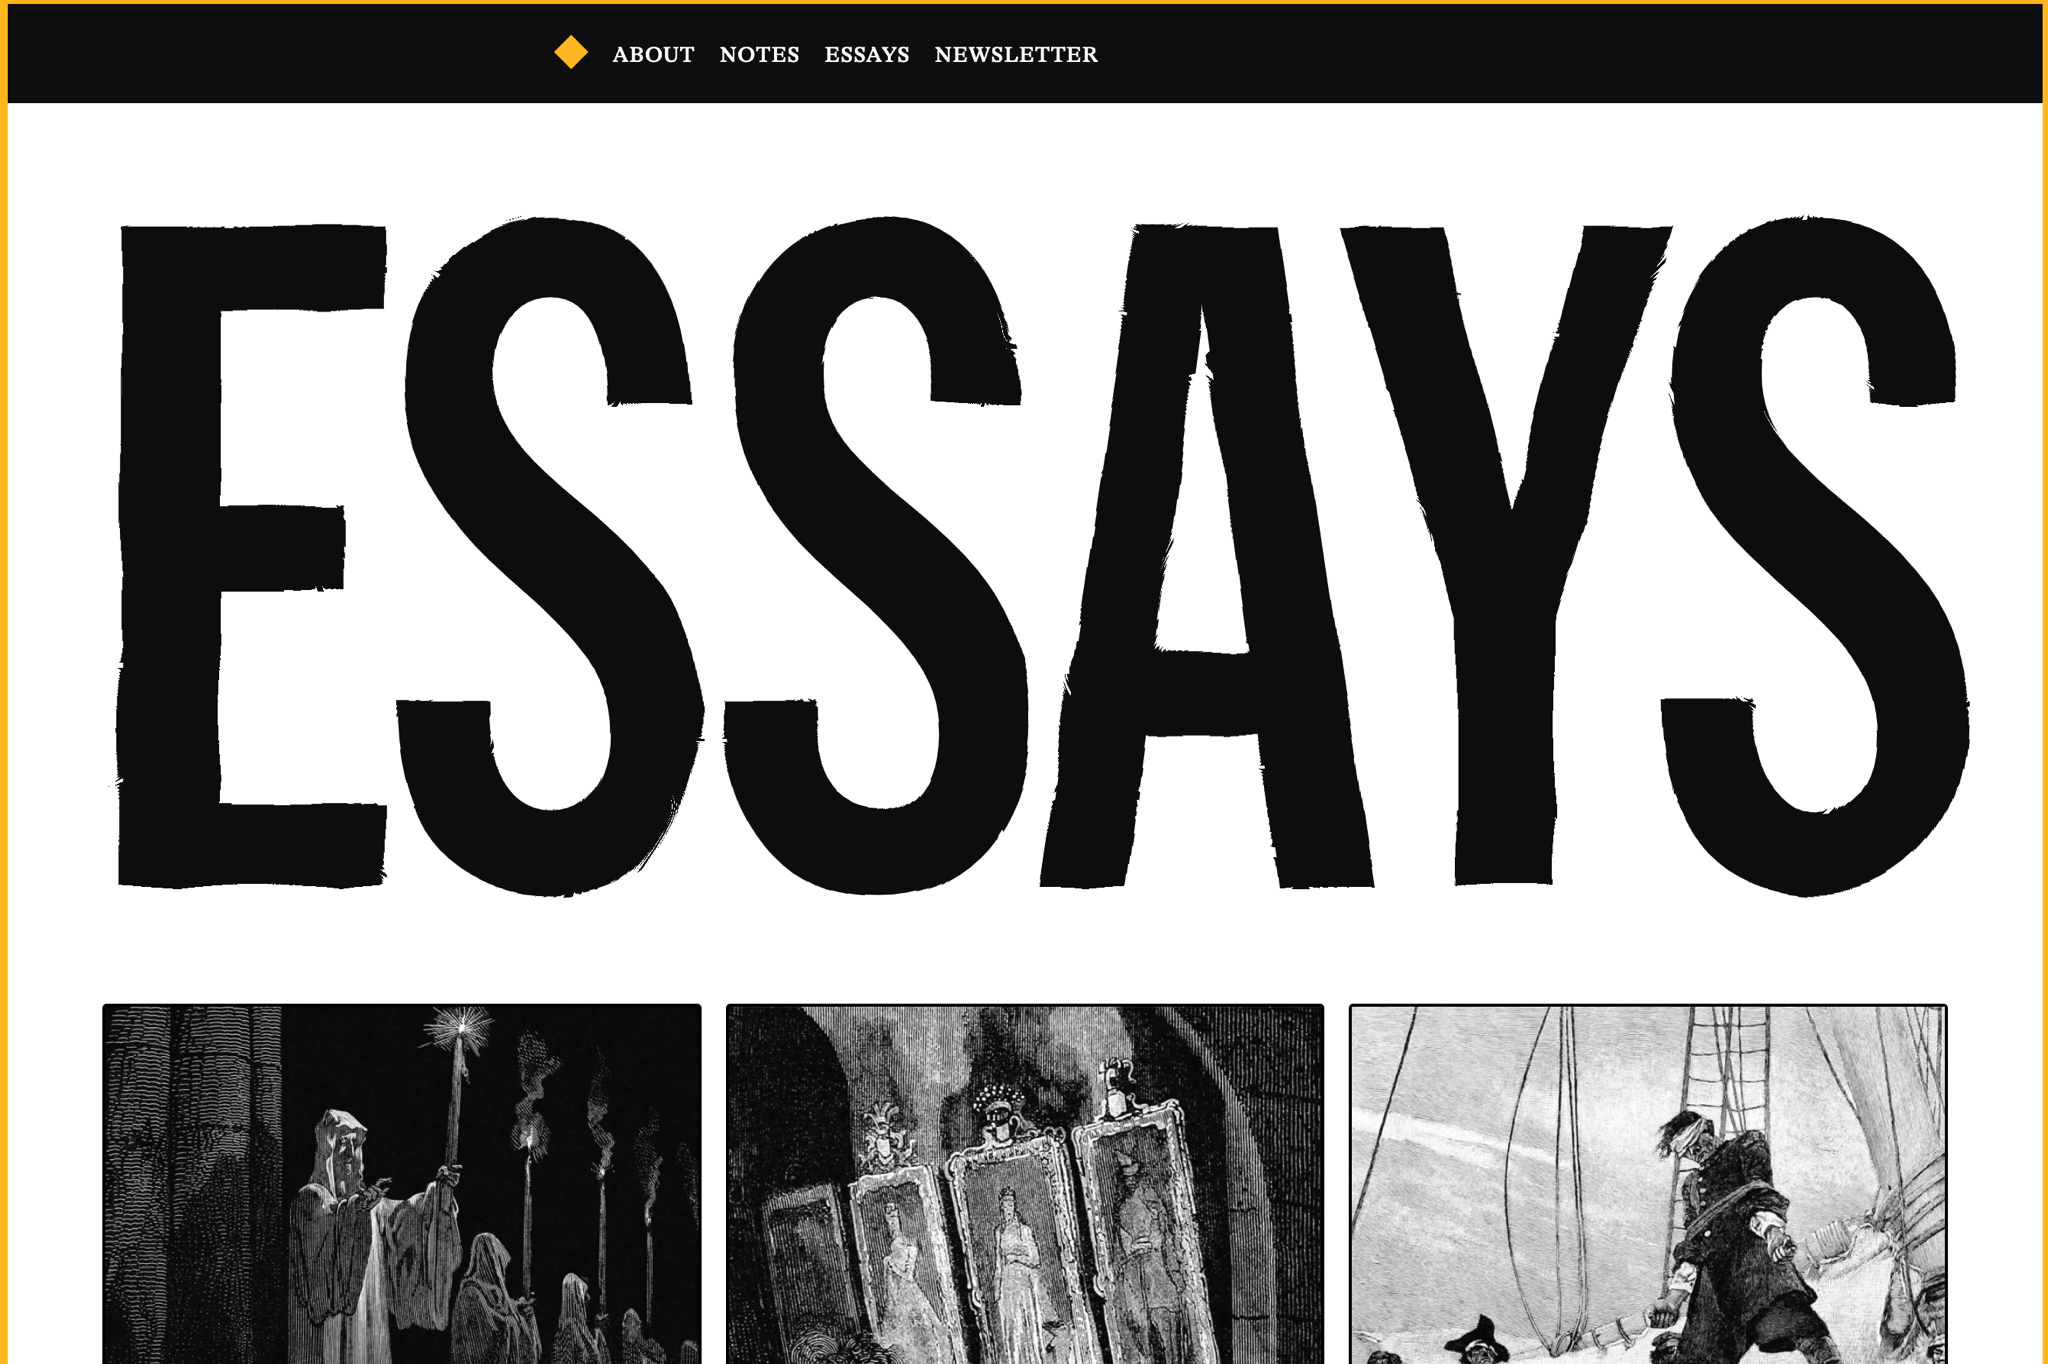 A screenshot of the Essays page